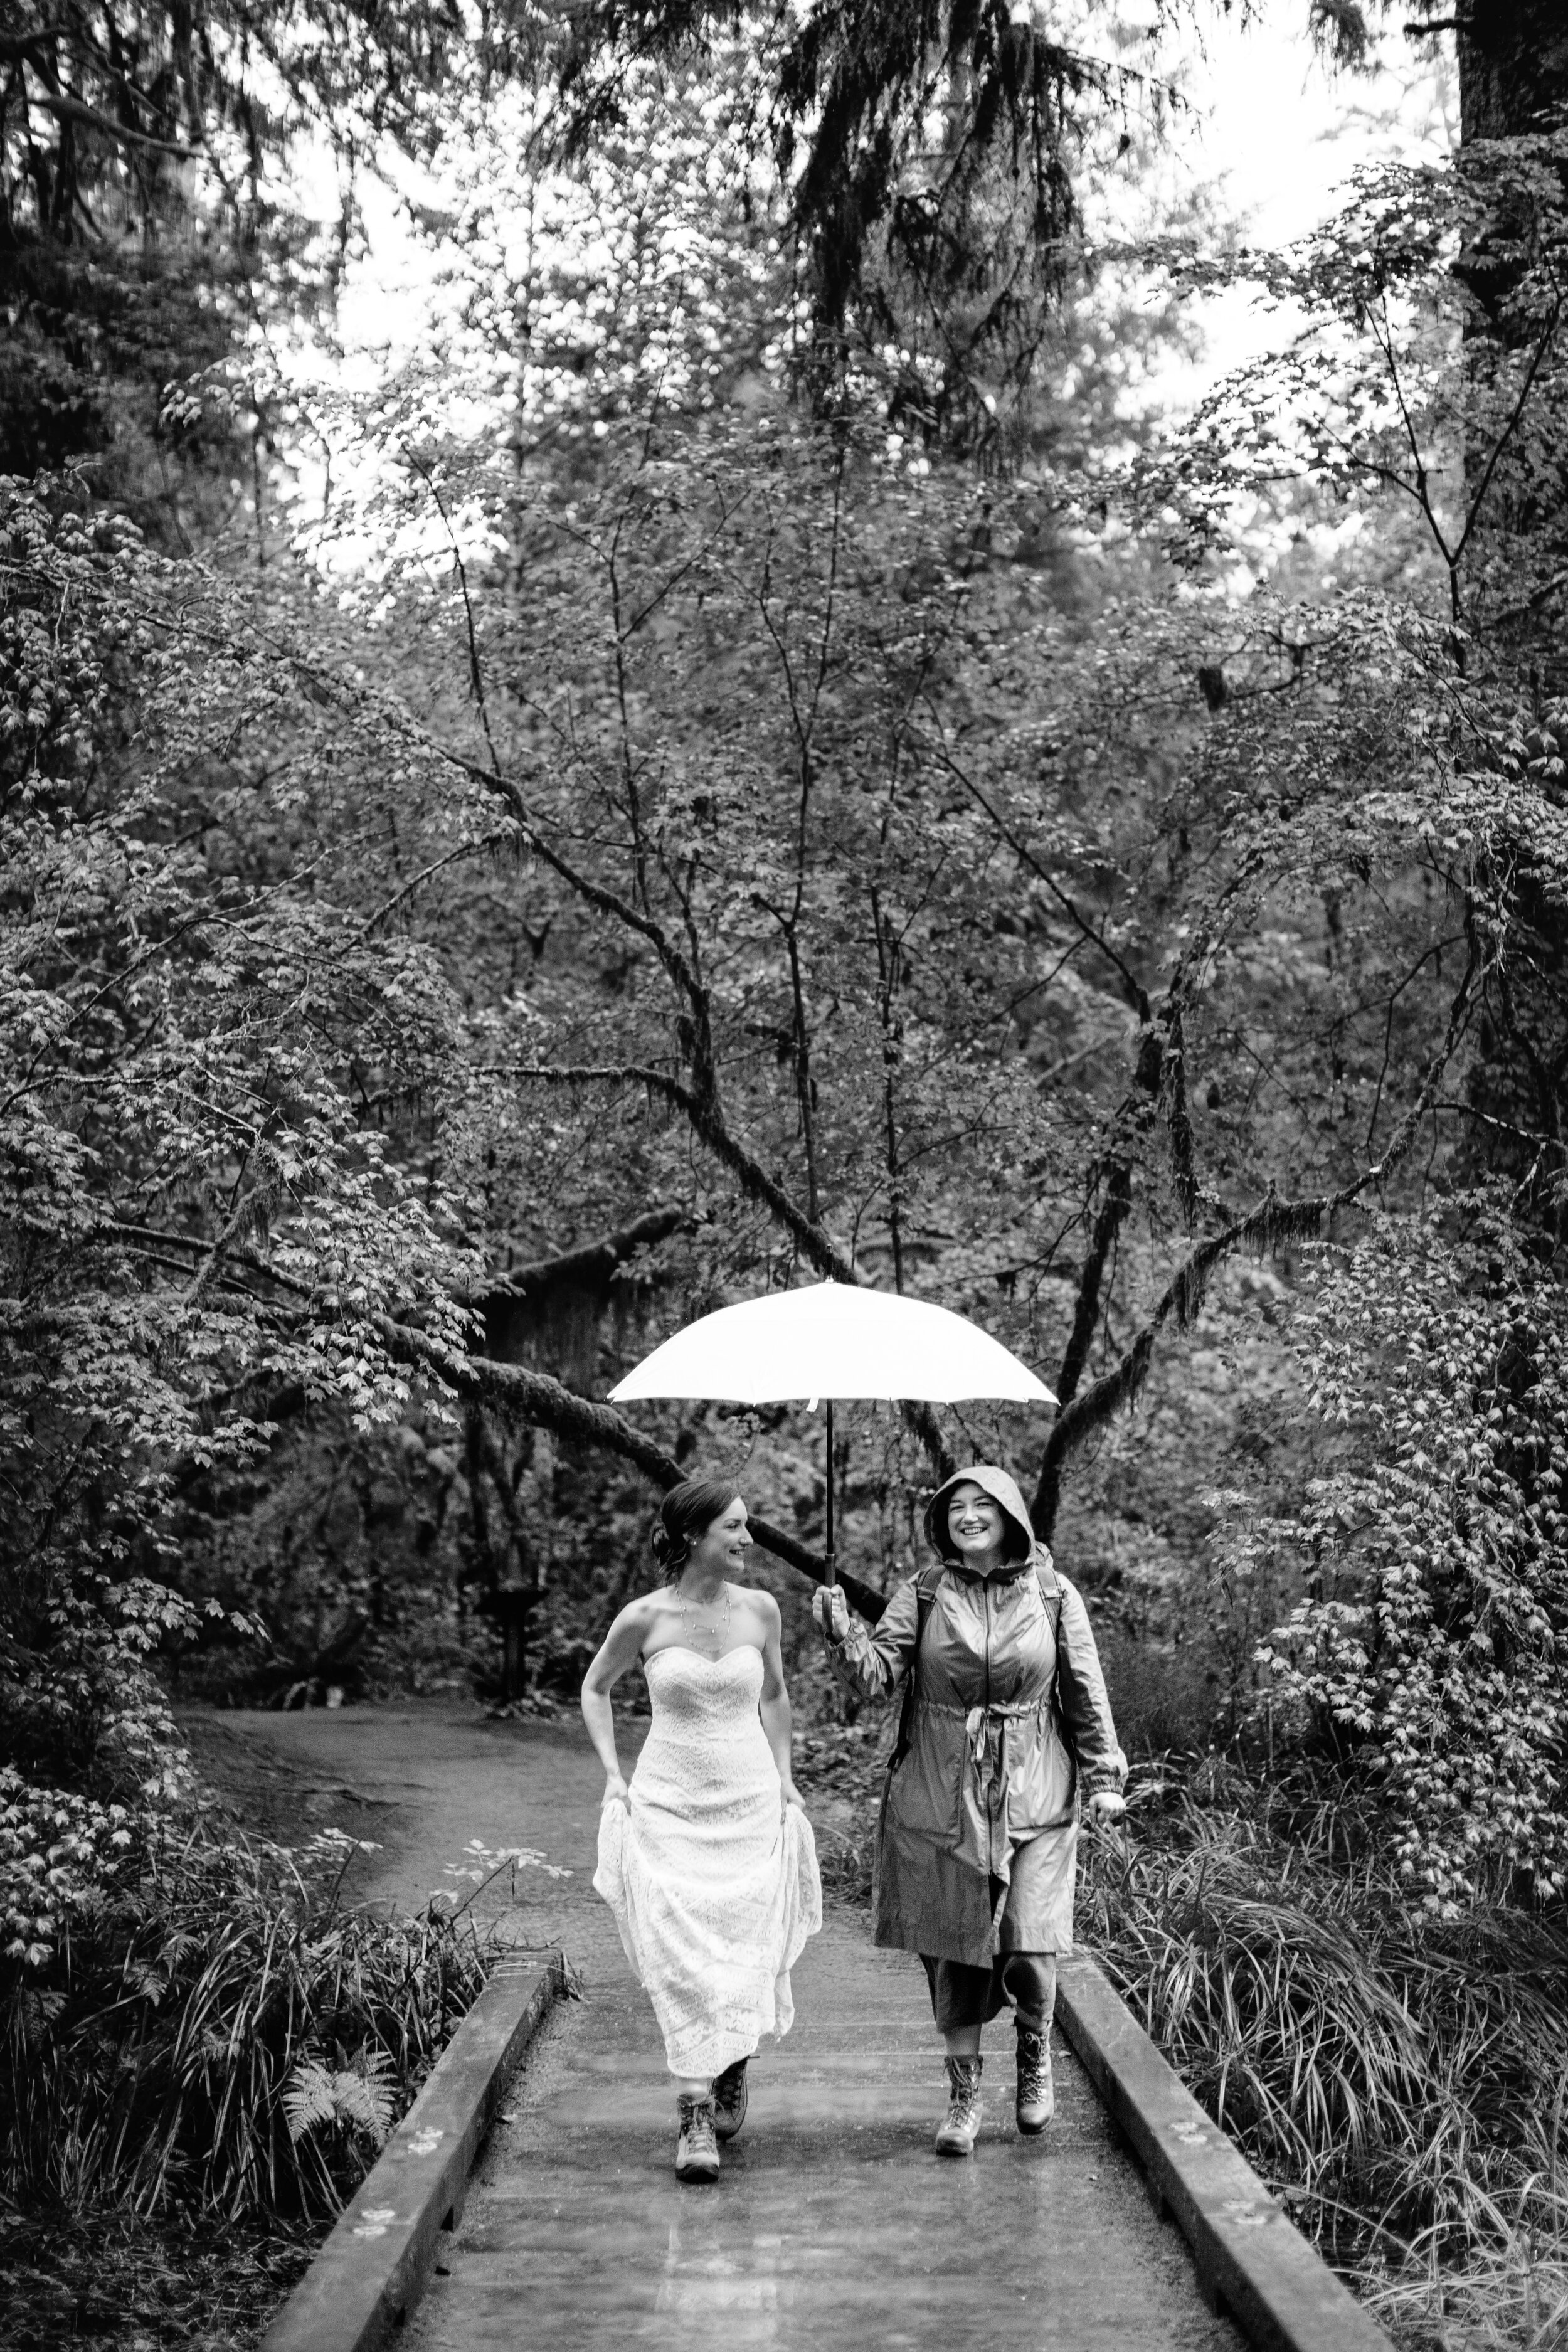 Nicole-Daacke-Photography-Olympic-national-park-elopement-photography-intimiate-elopement-in-olympic-peninsula-washington-state-rainy-day-ruby-beach-hoh-rainforest-elopement-inspiration-rainforest-pnw-elopement-photography-106.jpg